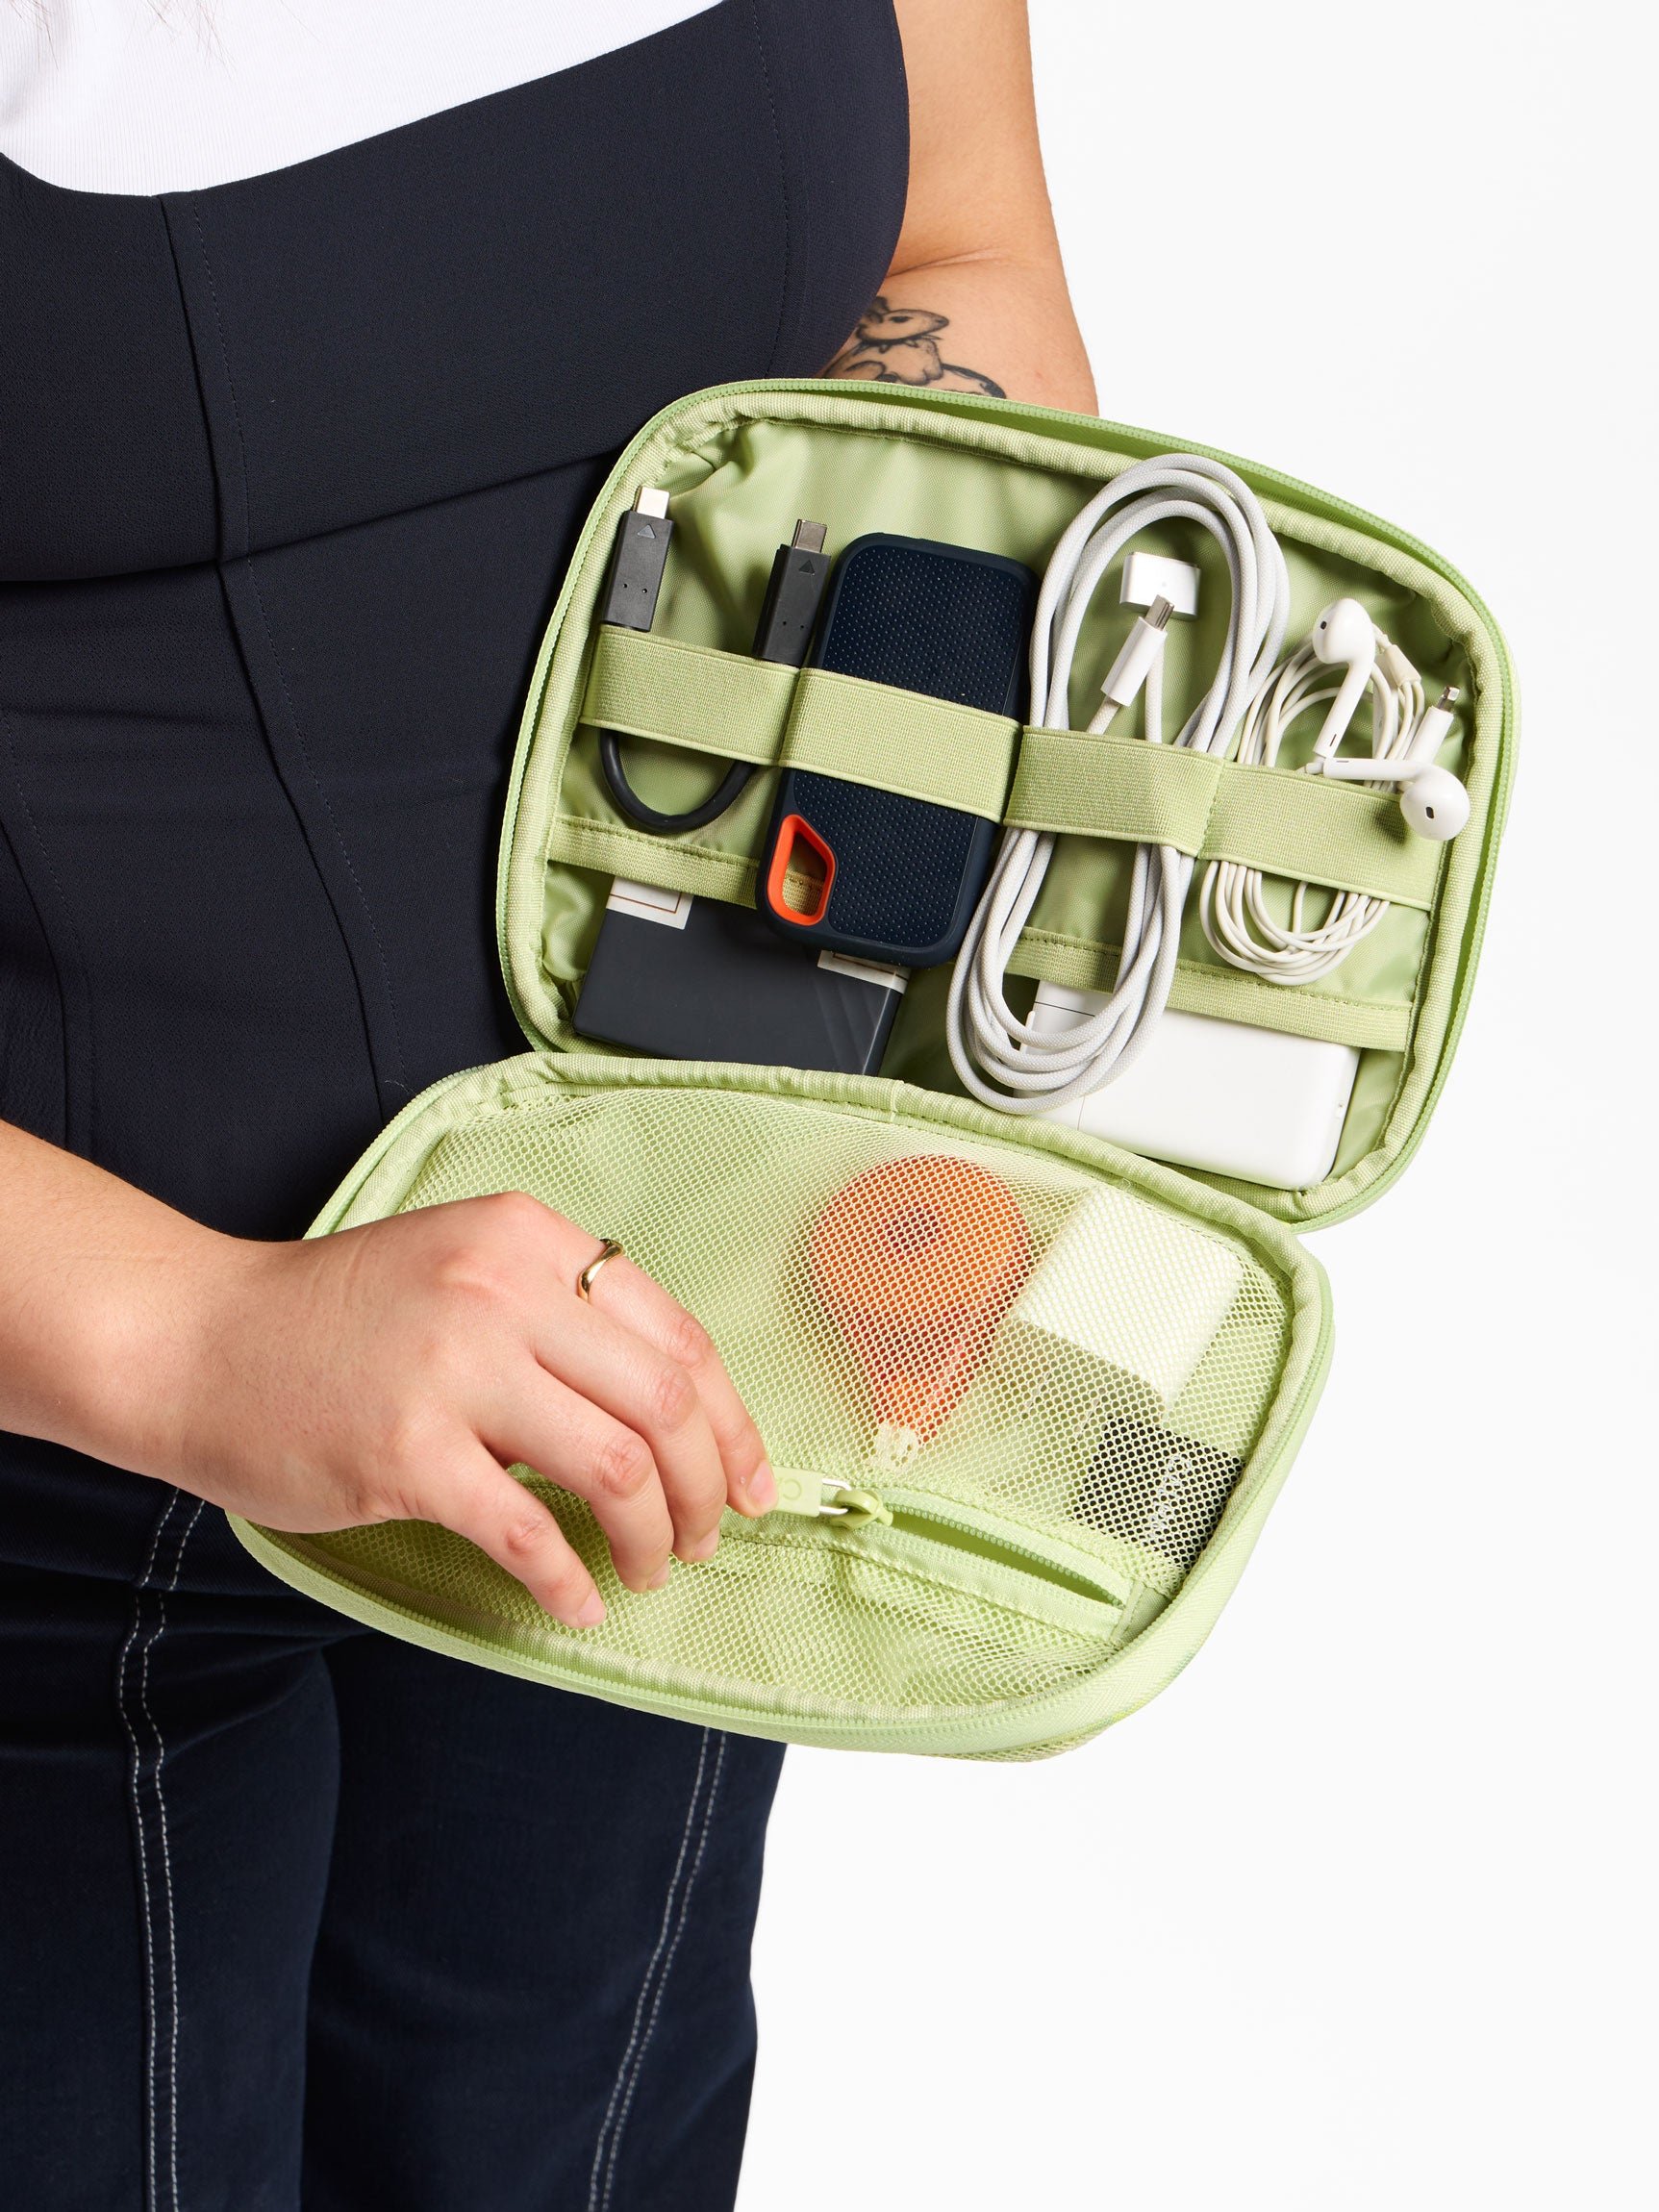 Model displaying cords and electronics organized within lime viper tech organizer